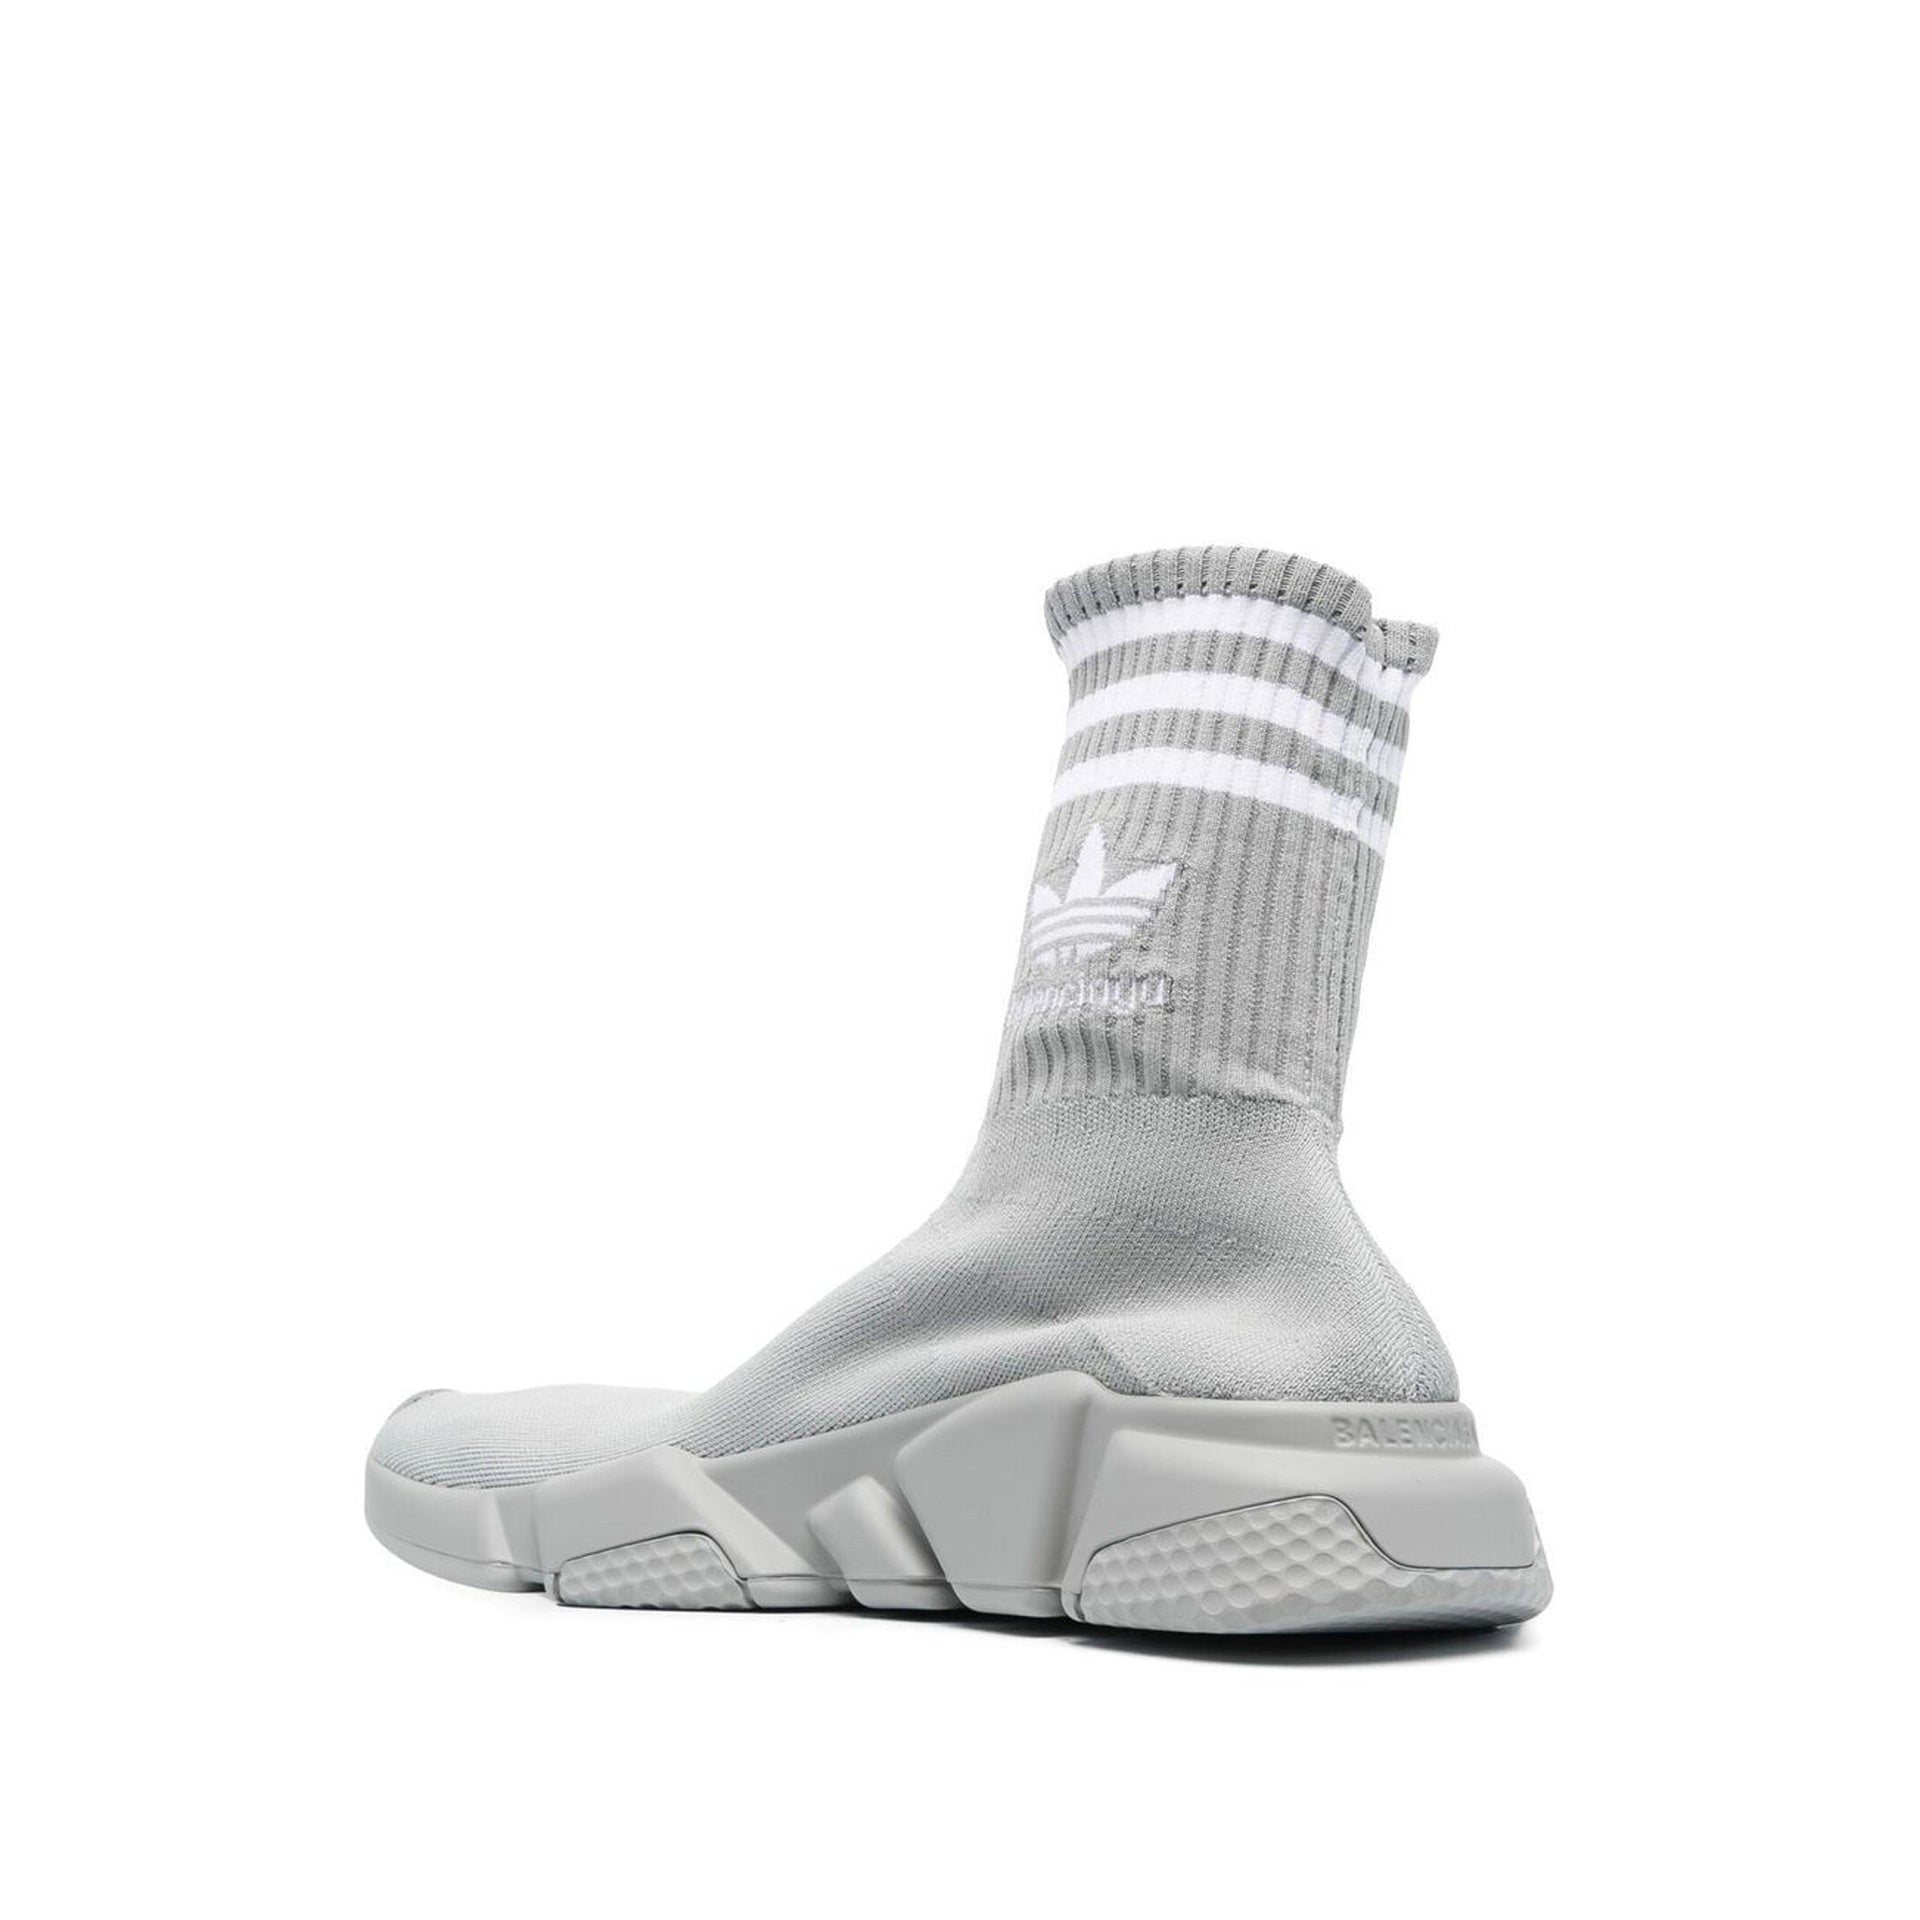 BALENCIAGA-X-ADIDAS-OUTLET-SALE-Balenciaga-X-Adidas-Speed-2_0-Lt-Sock-Sneakers-Sneakers-ARCHIVE-COLLECTION-3_20664fc1-58f0-4979-ae63-744f1efd0e59.jpg